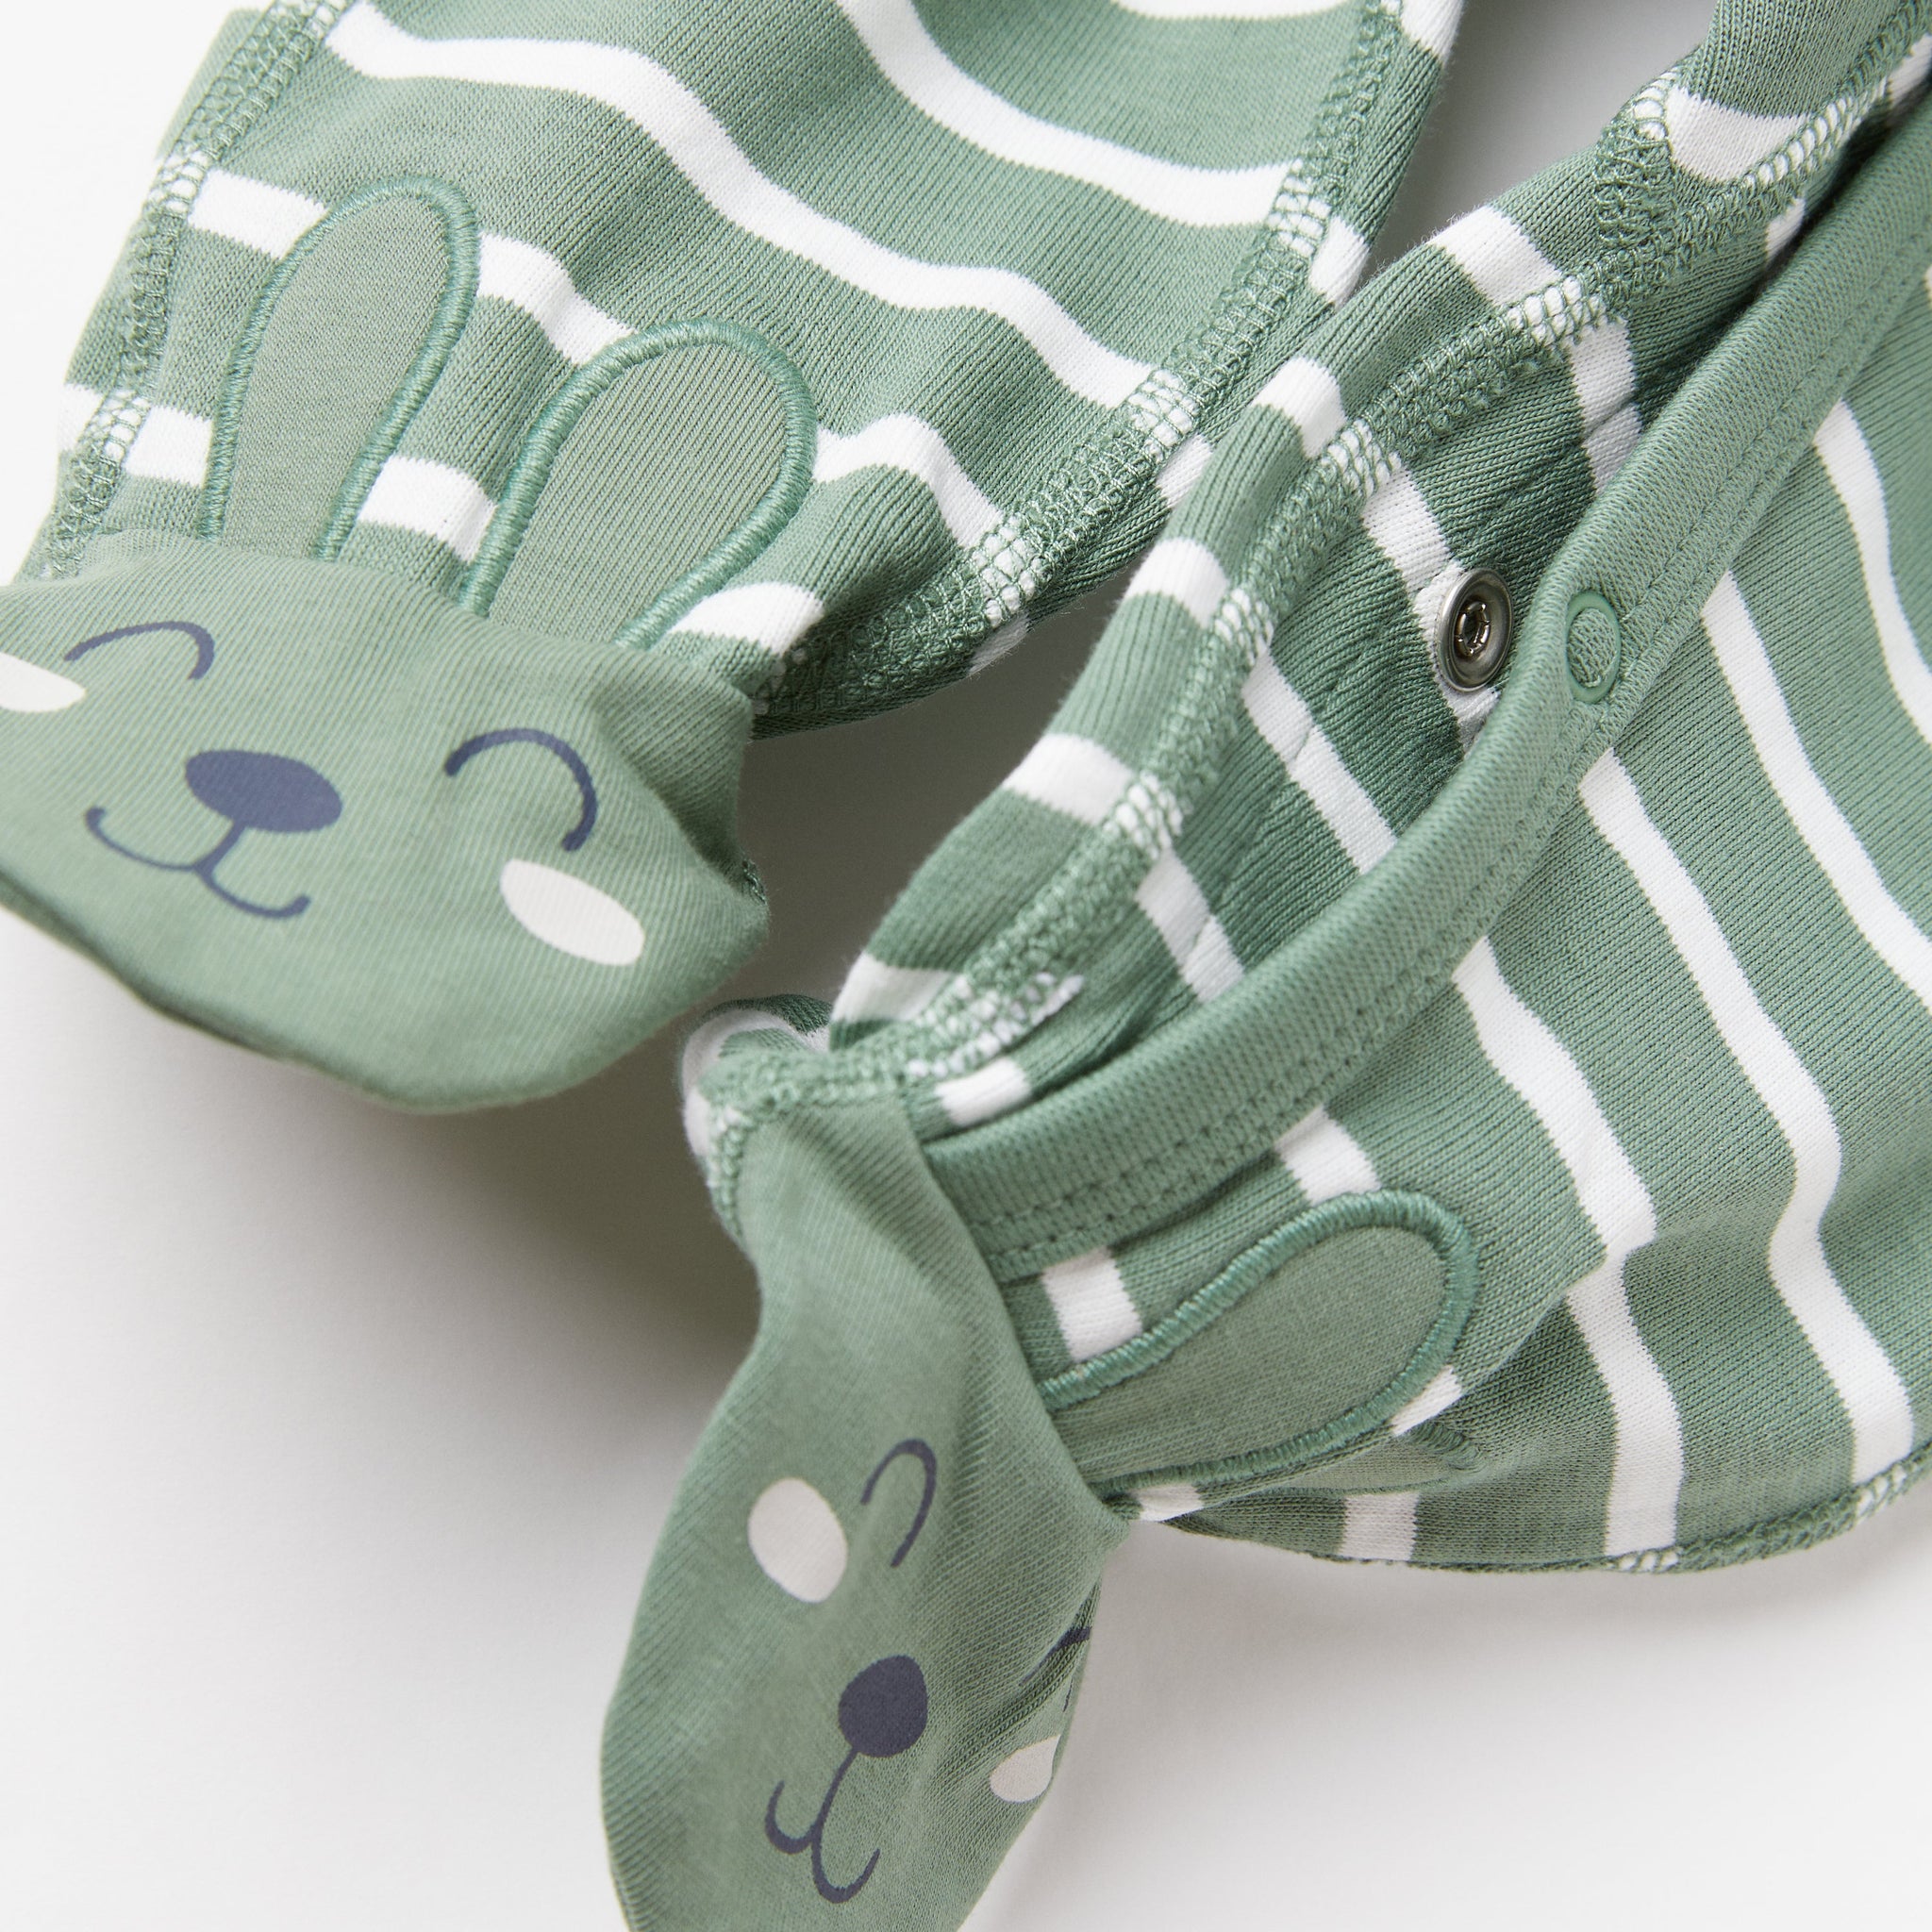 Rabbit Print Green Baby Romper from the Polarn O. Pyret Kidswear collection. The best ethical kids clothes